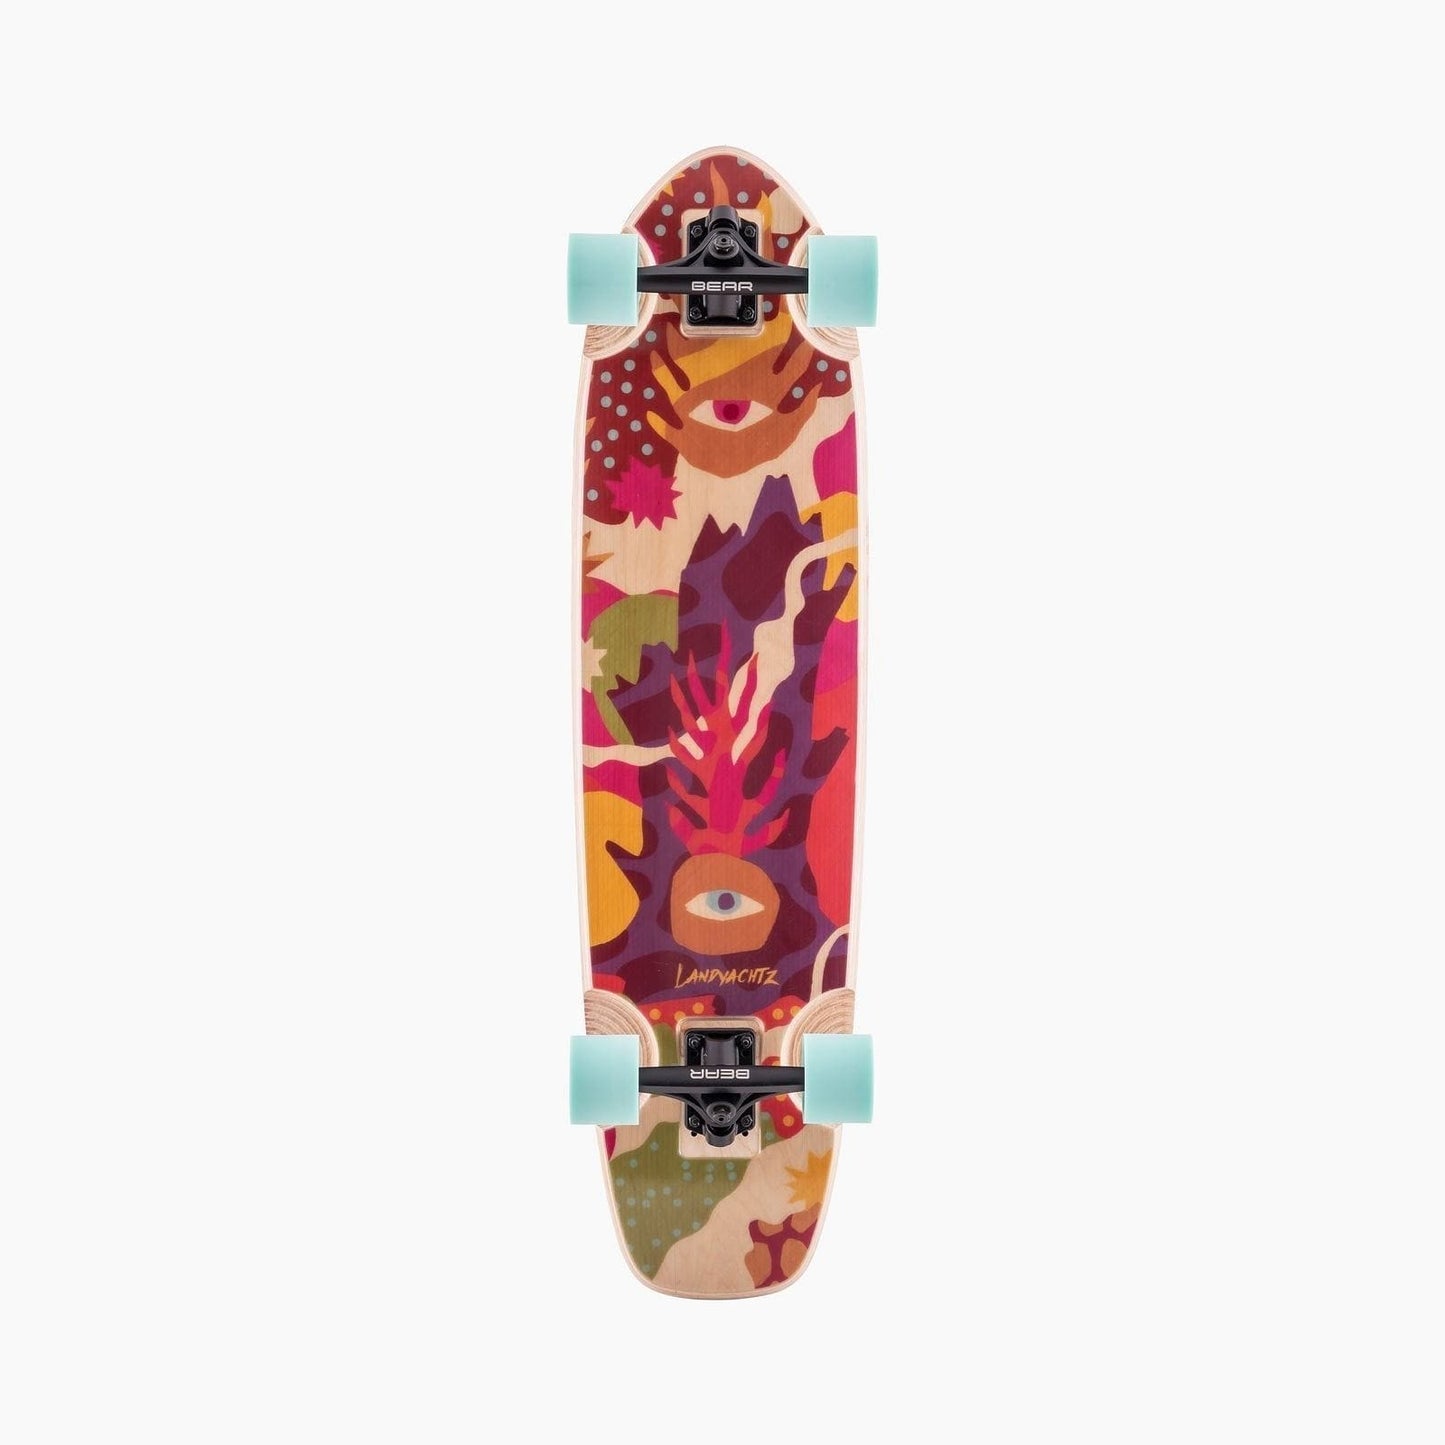 Landyachtz | Freedive Reef Complete (Wheels and Trucks May Vary)